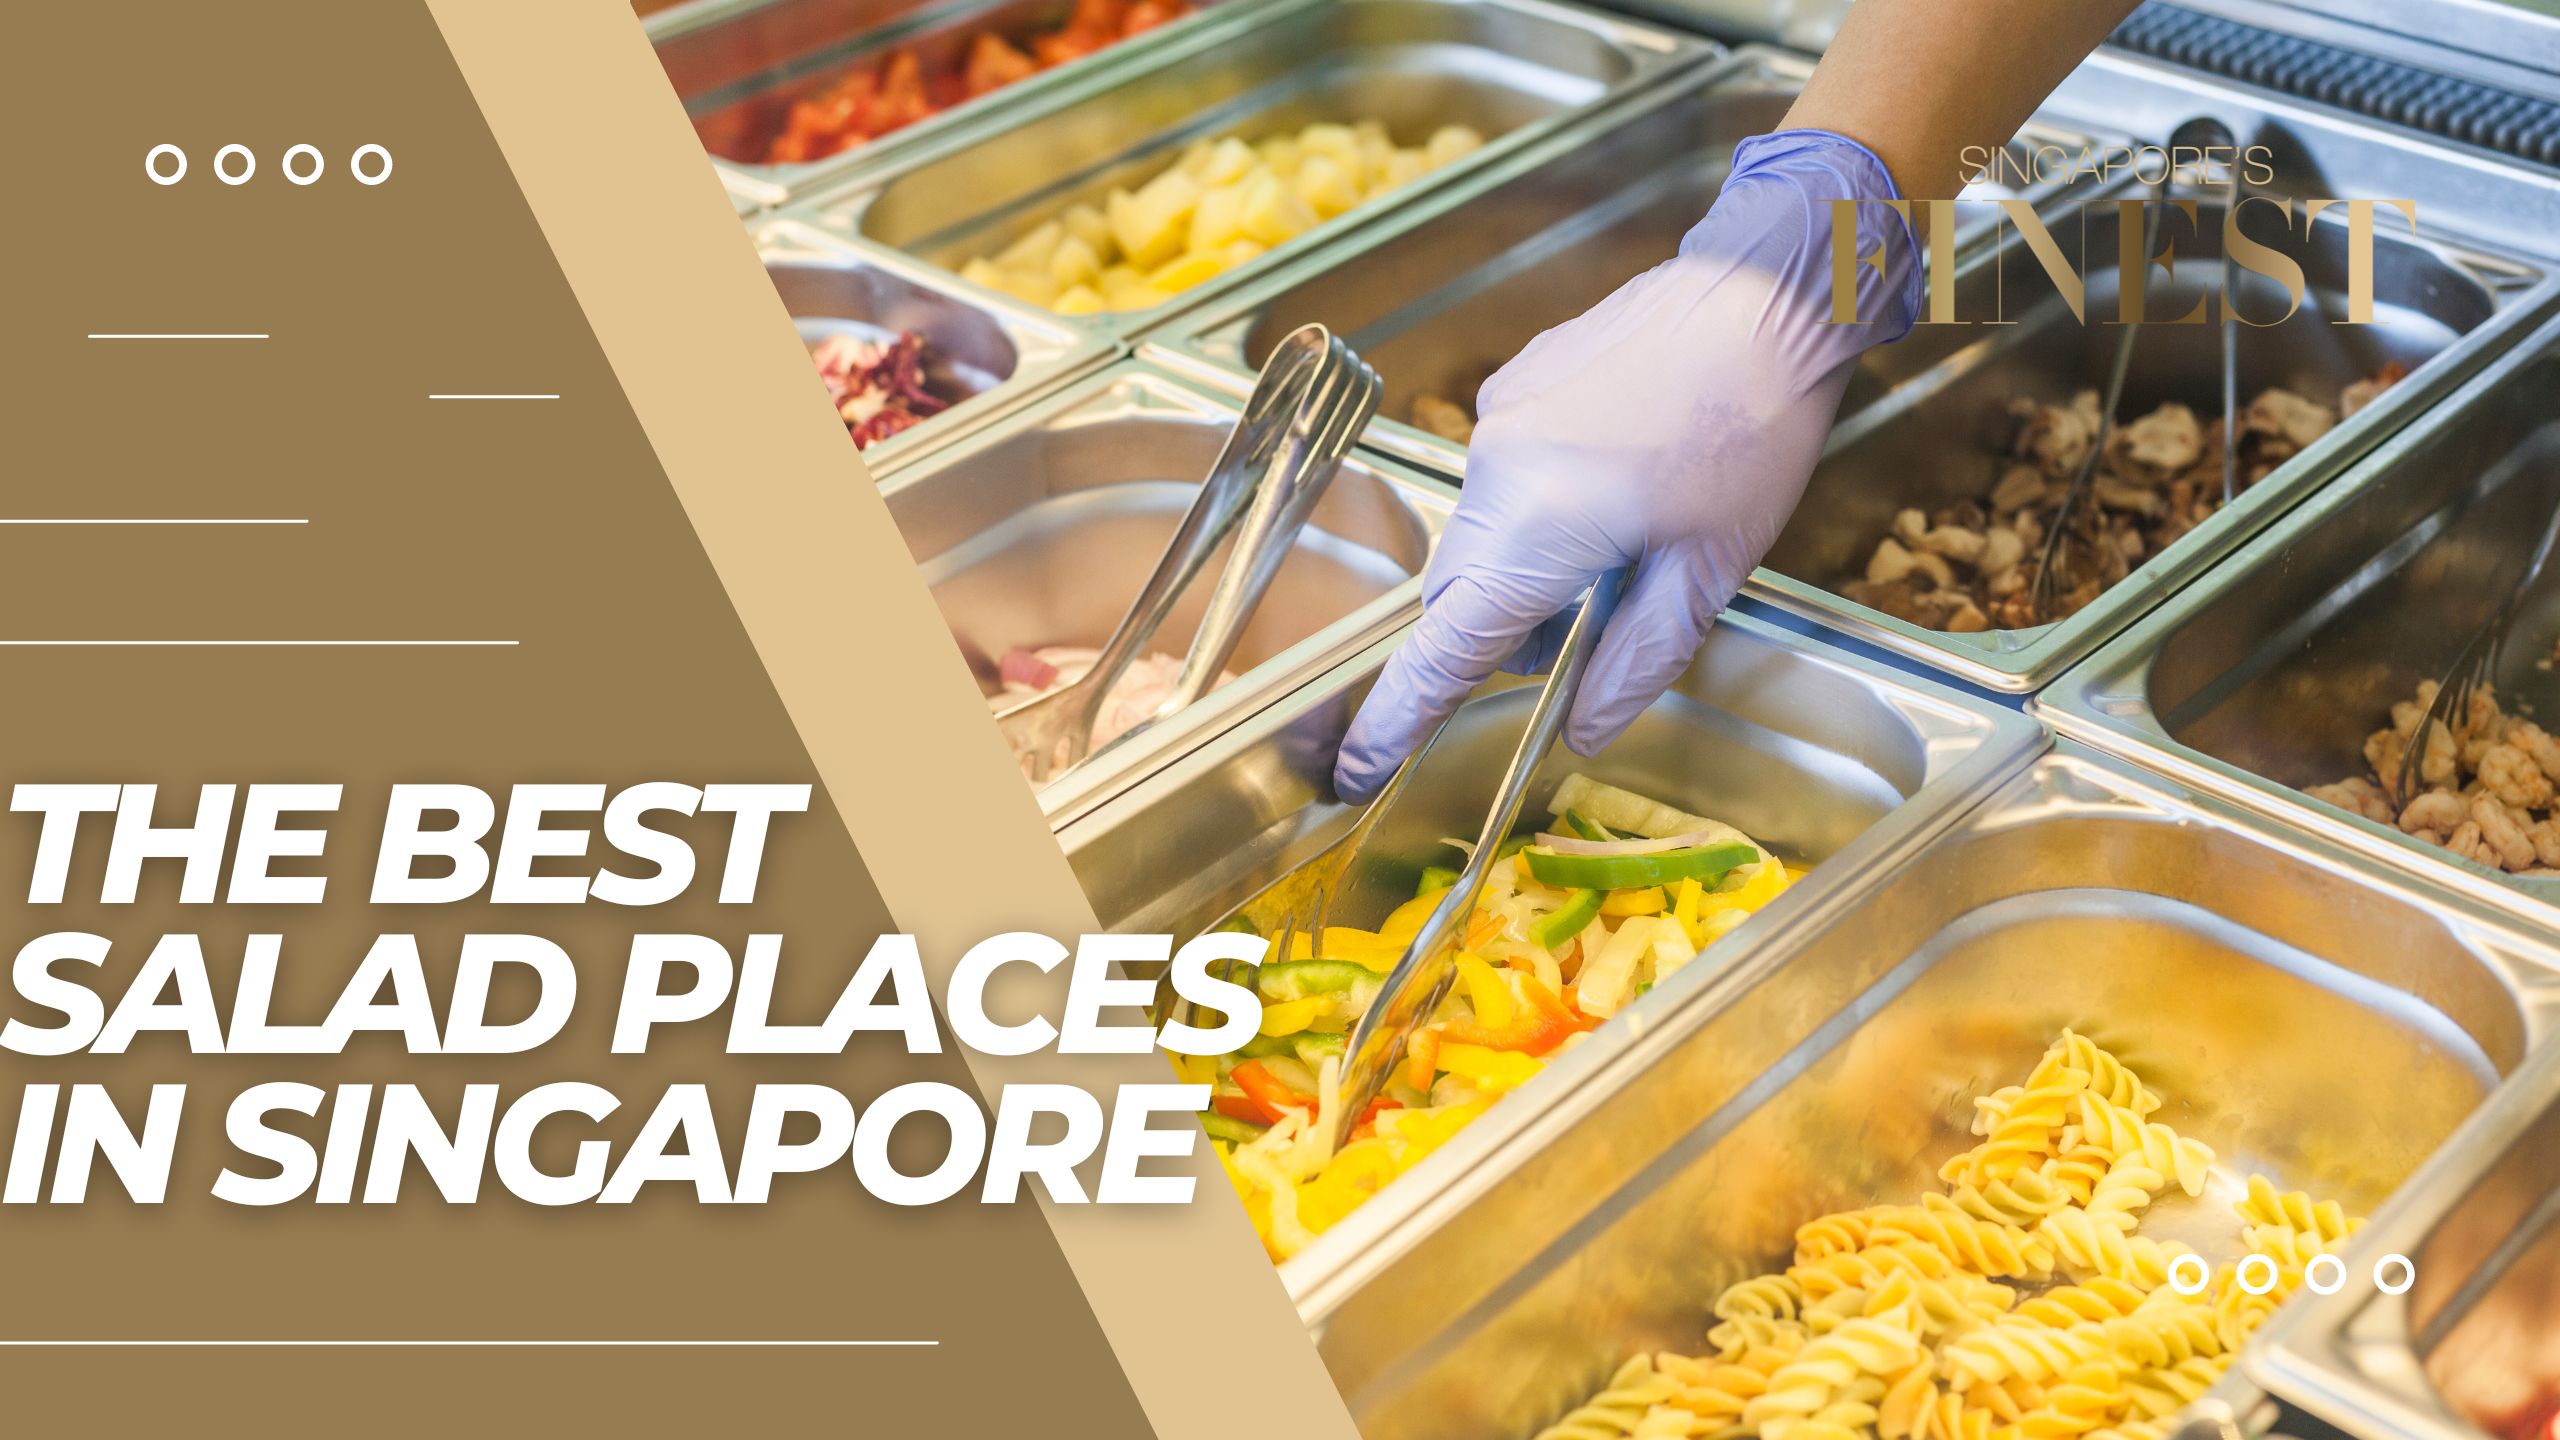 The Finest Salad Places in Singapore